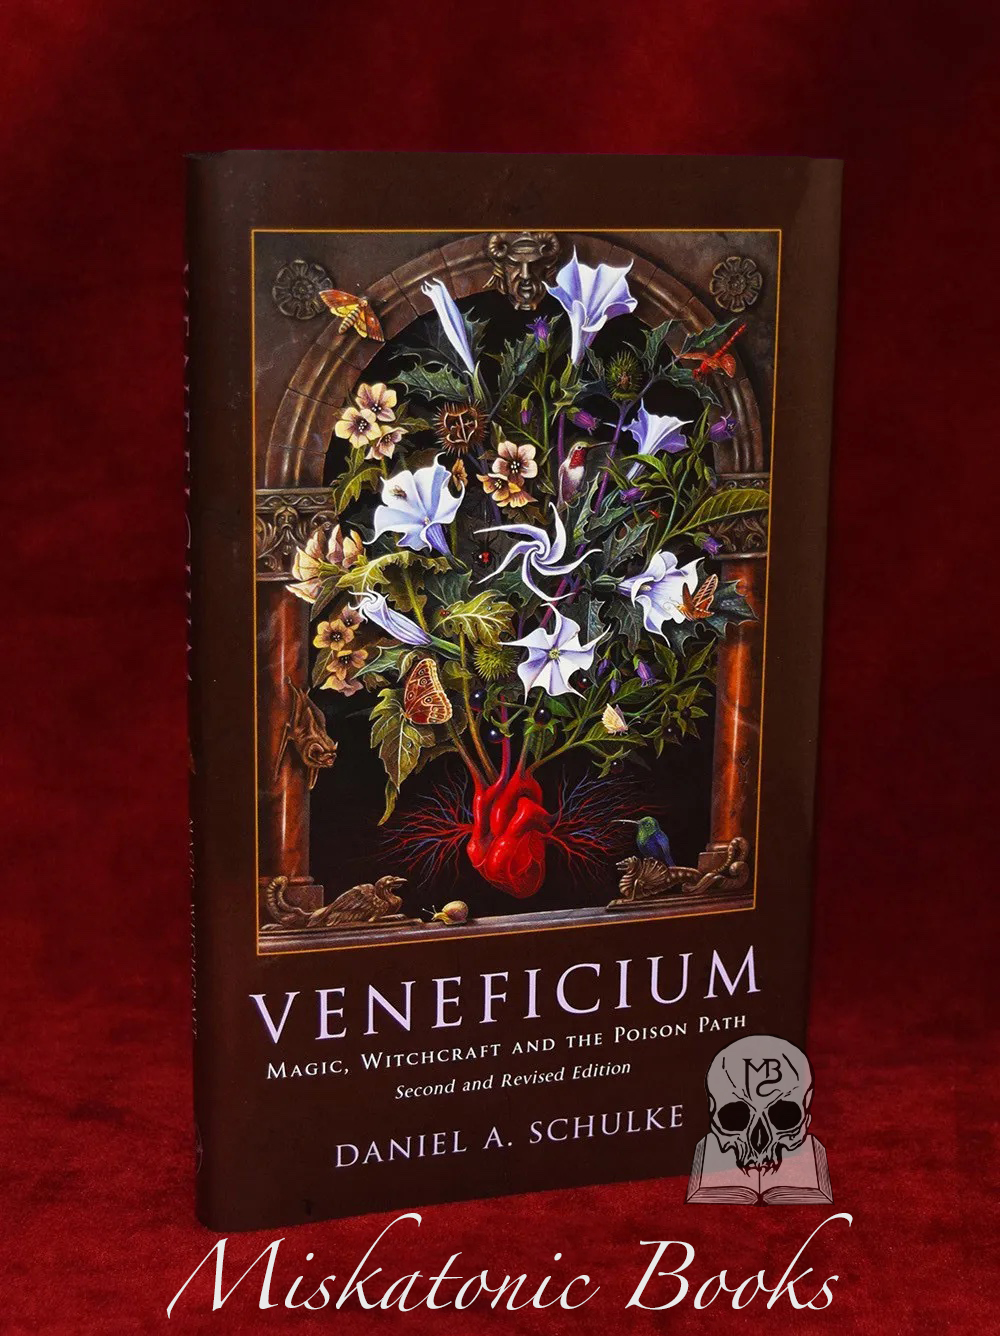 VENEFICIUM: Magic, Witchcraft and the Poison Path by Daniel A. Schulke (Revised Second Edition Trade Hardcover)